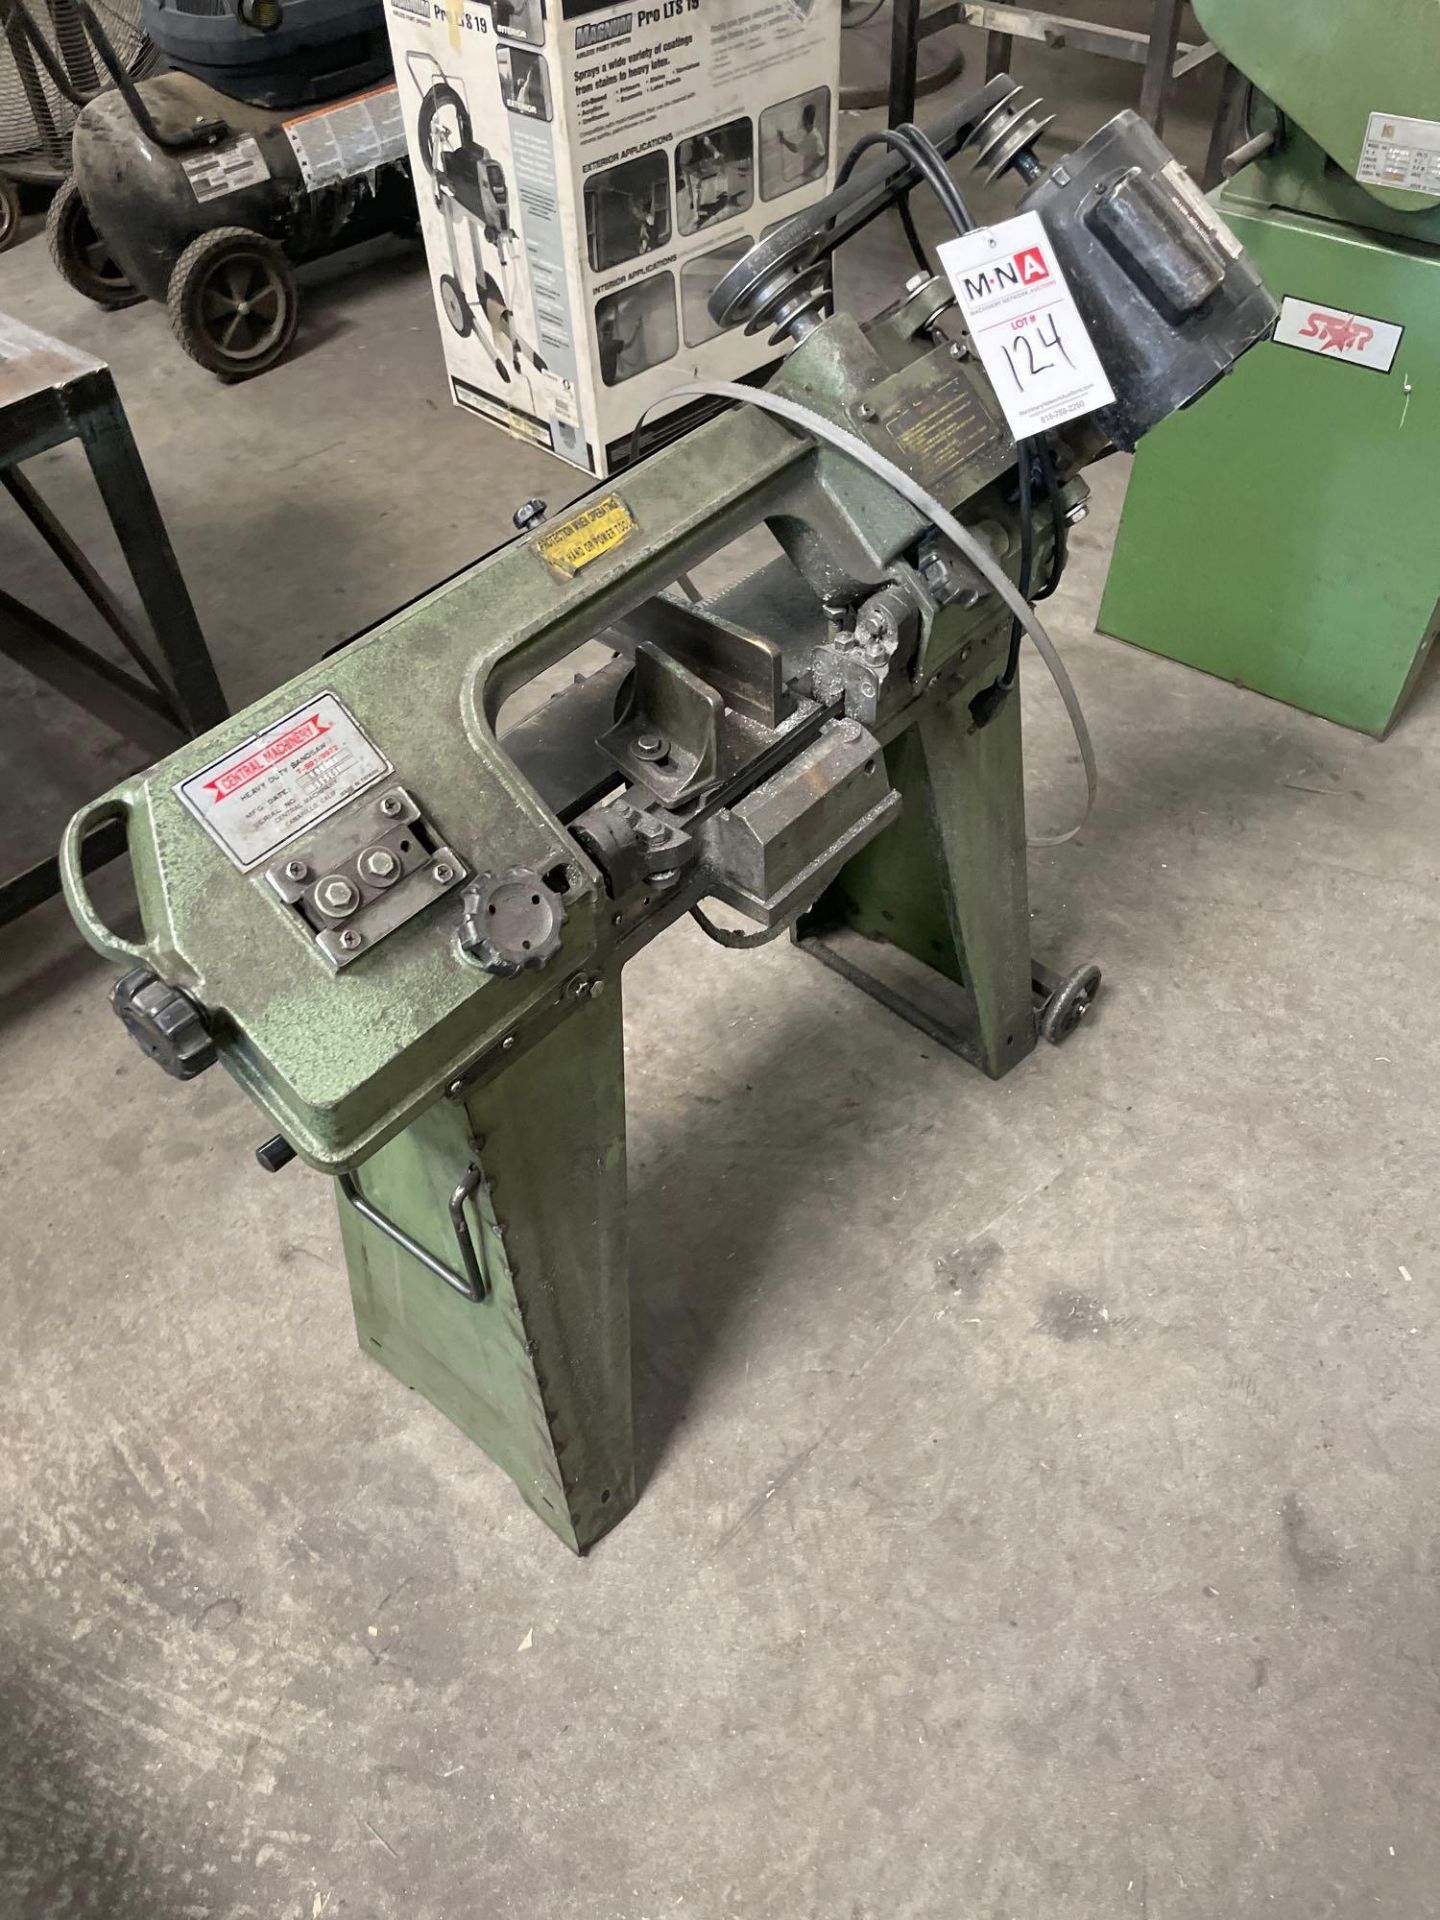 Central Machinery T-591/9972 Horizontal Band Saw, s/n 649441, New 1996 - Image 2 of 4